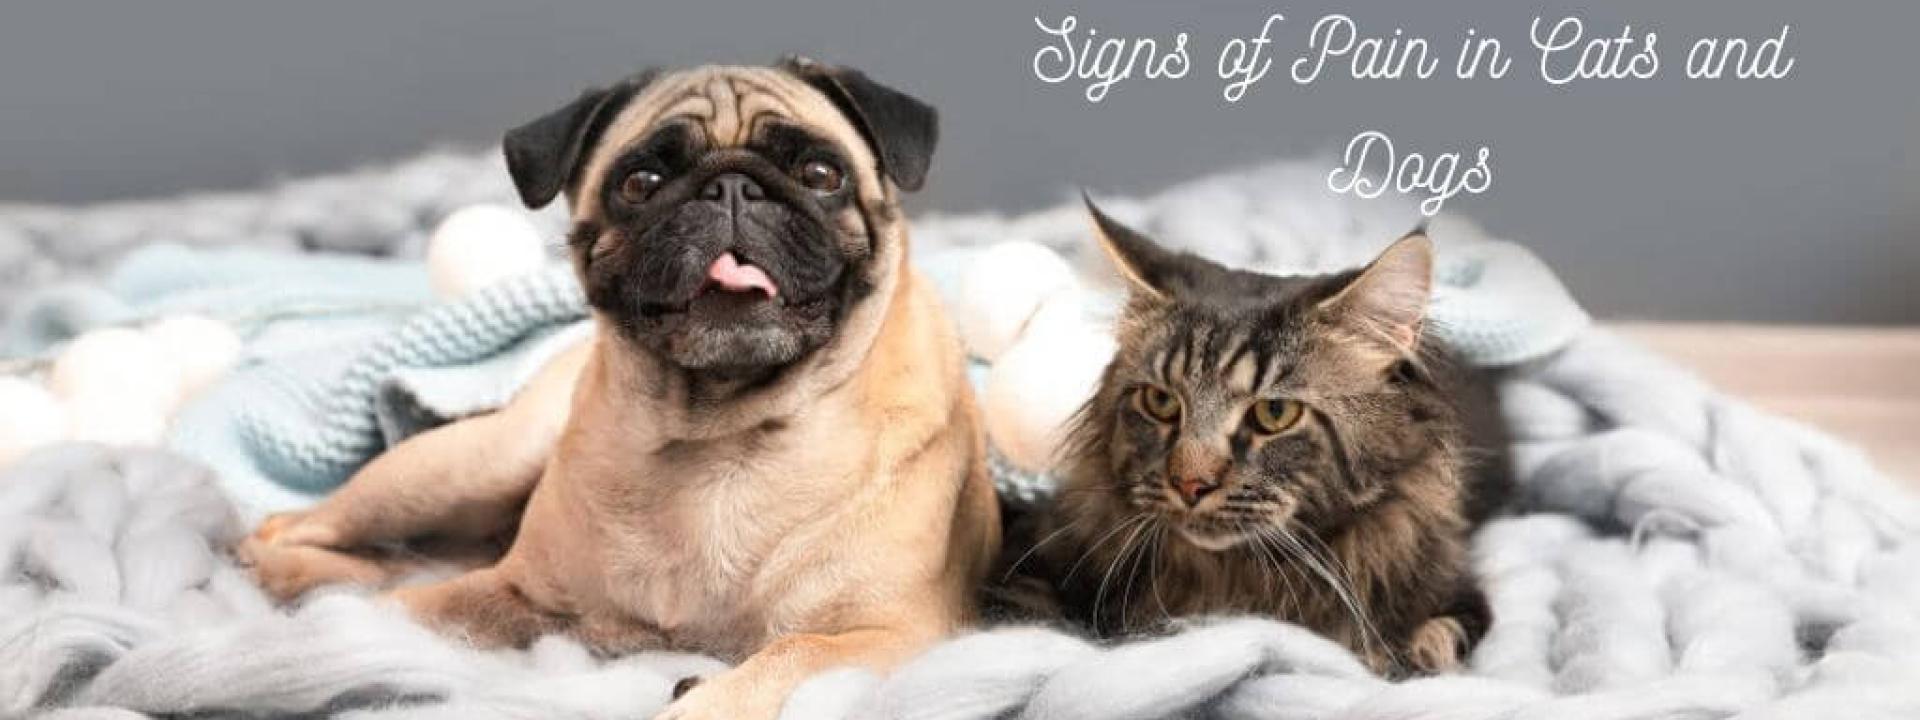 Signs of Pain in Cats and Dogs